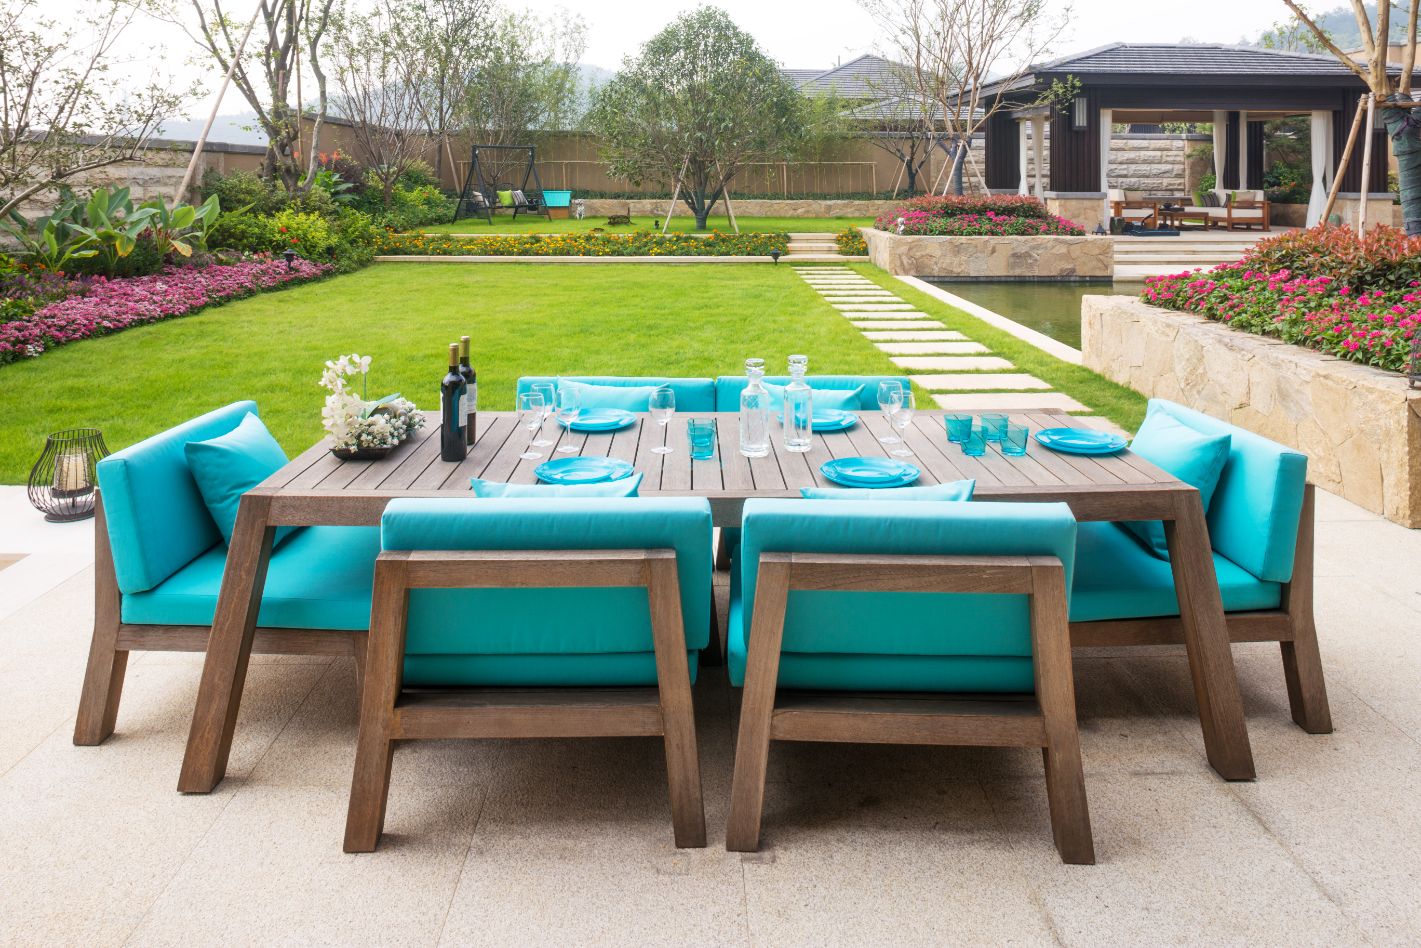 An outdoor dining table with blue chairs and a green lawn featuring the best wood furniture.